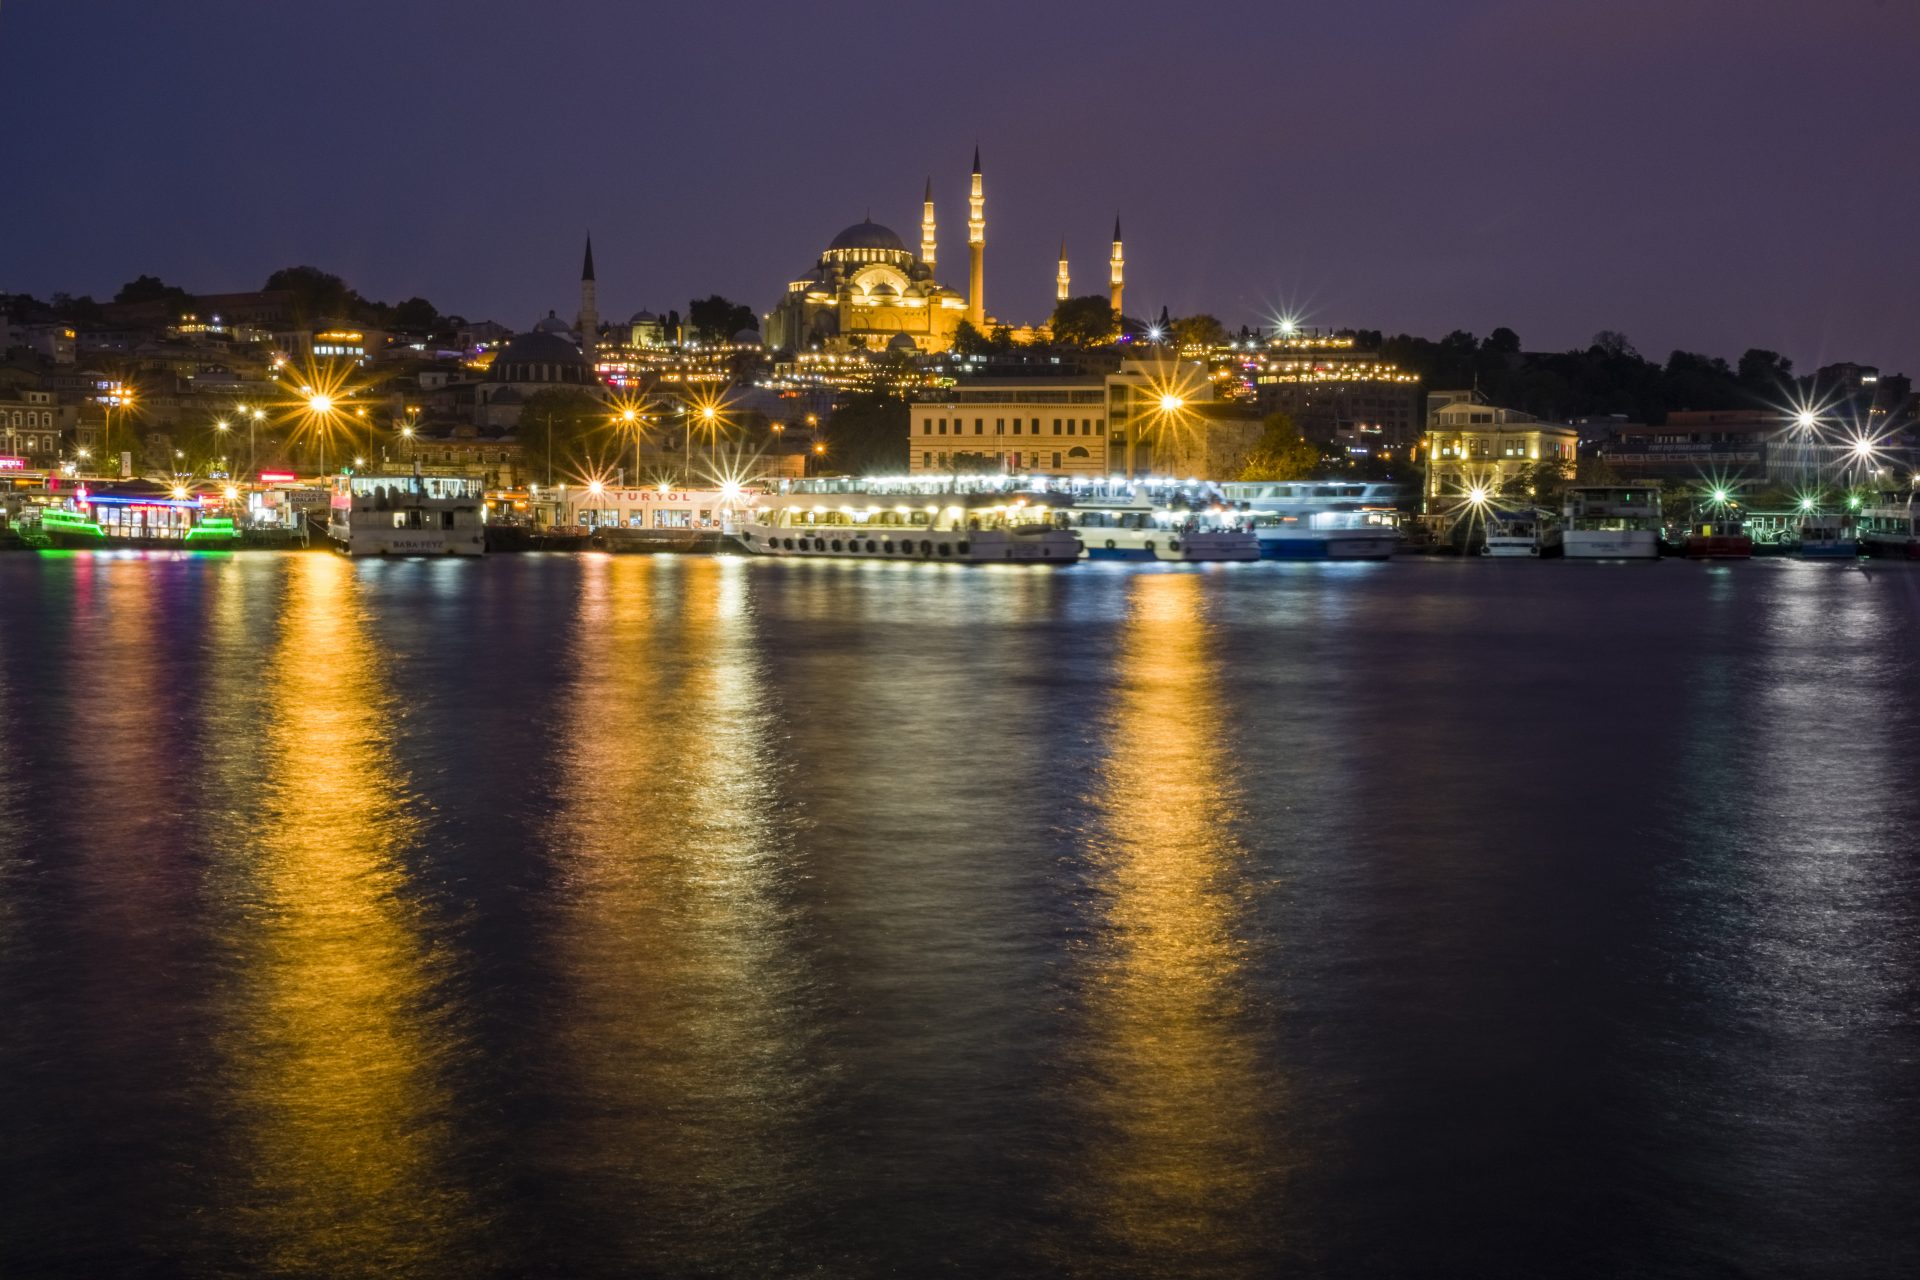 <p>In the city where East meets West, you can explore iconic landmarks such as the Hagia Sophia, the Blue Mosque, and the Grand Bazaar. Its rich history, varied culture, and impressive architecture make Istanbul a must-see destination.</p>